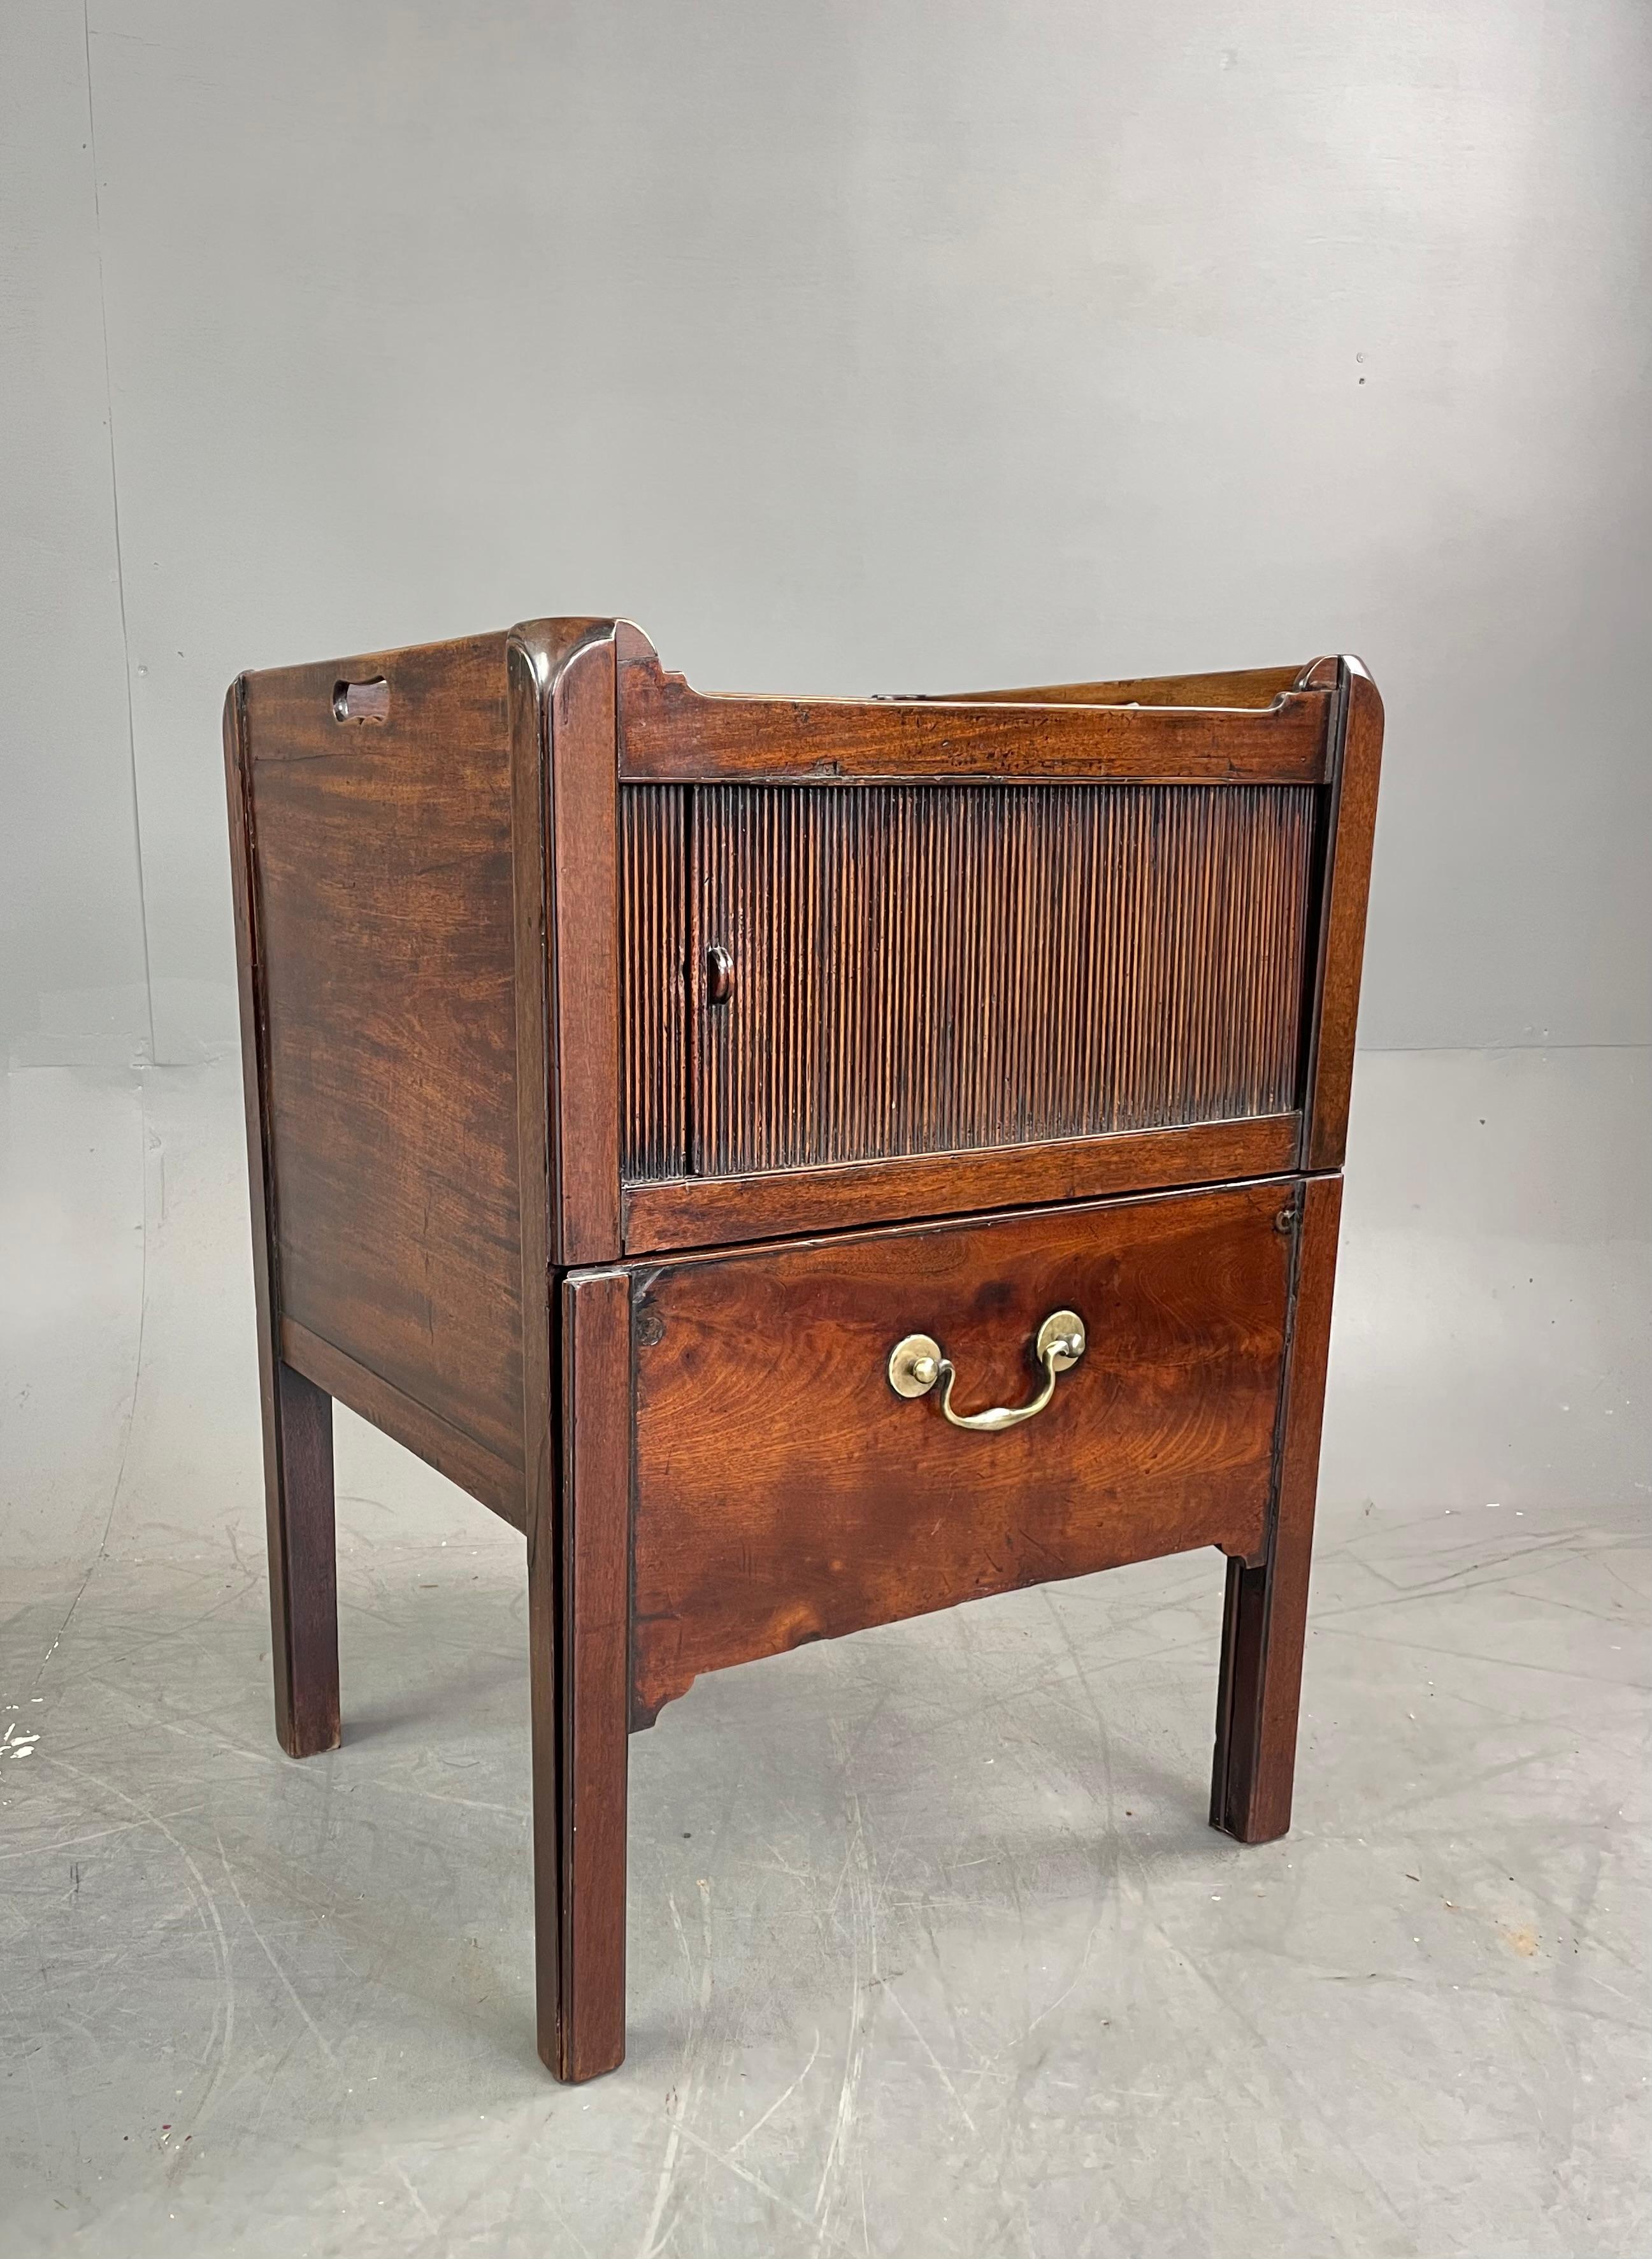 A wonderful George 111 mahogany tray top tambour front Georgian bedside cabinet .
The cabinet is constructed of the finest mahogany of the time with a wonderful colour and grain ,This suburb cabinet has a sliding tambour front and a shallow pull out